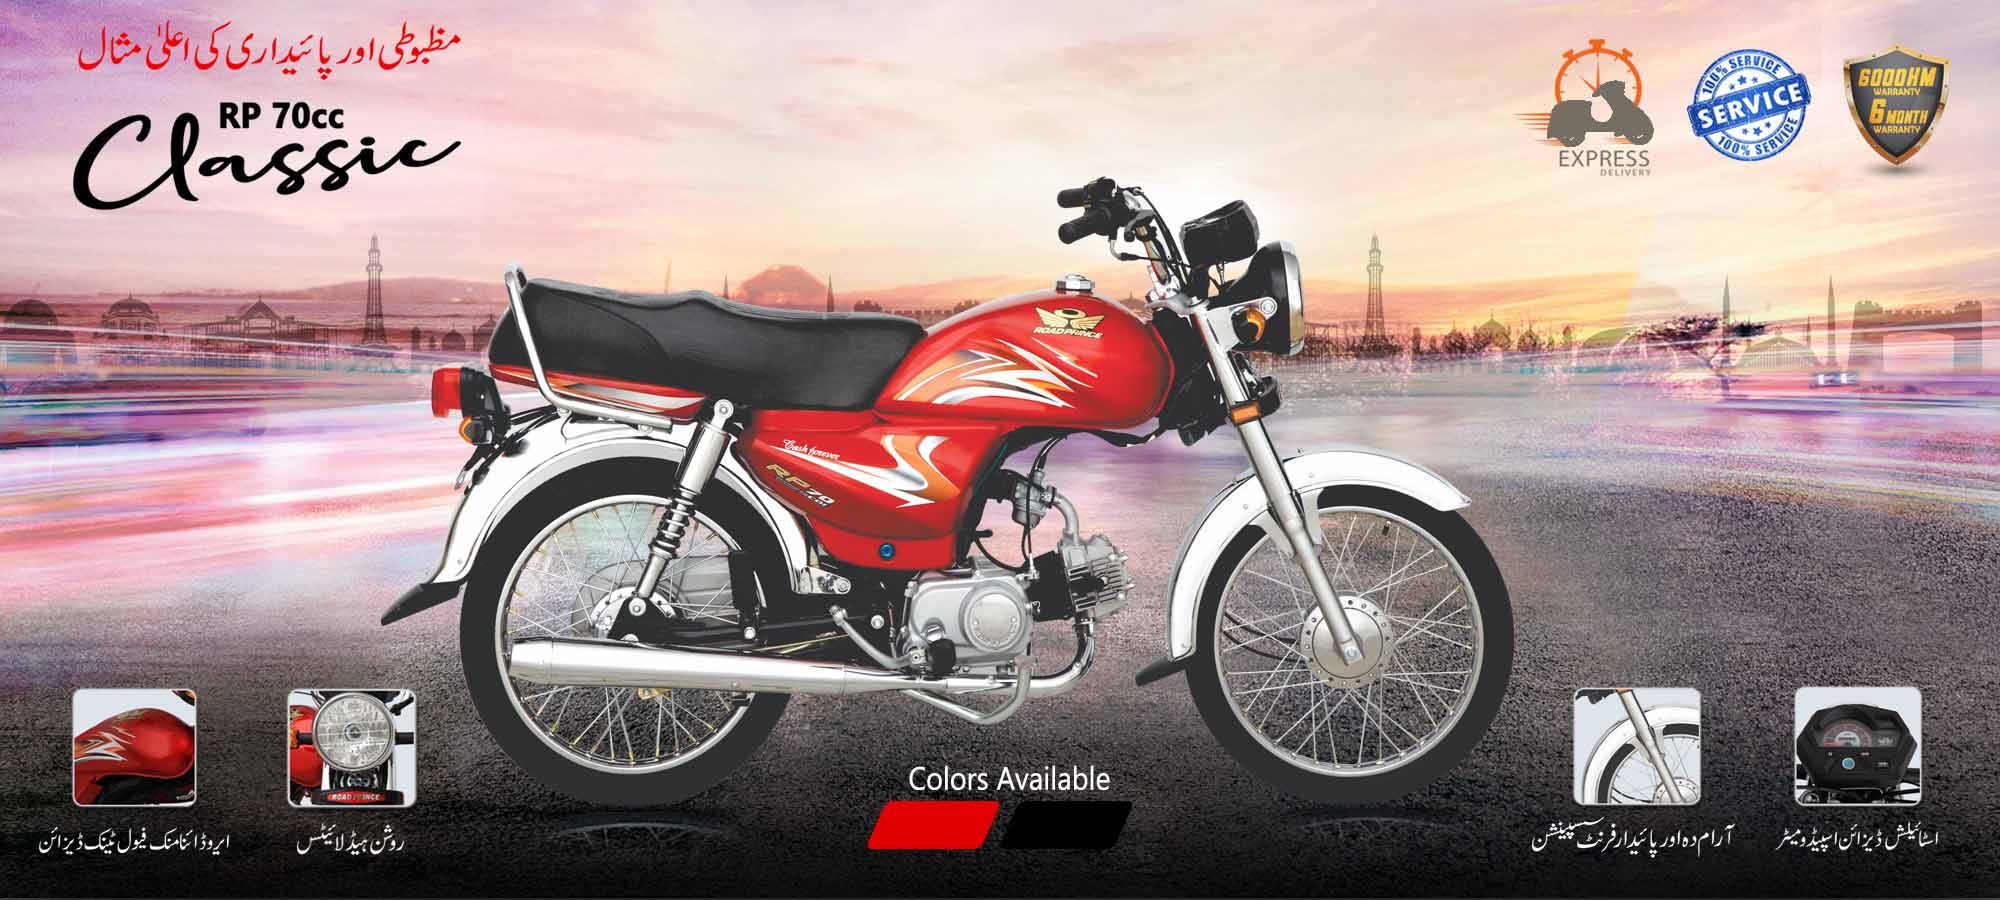 Road Prince Classic 70cc 2022 New Model View